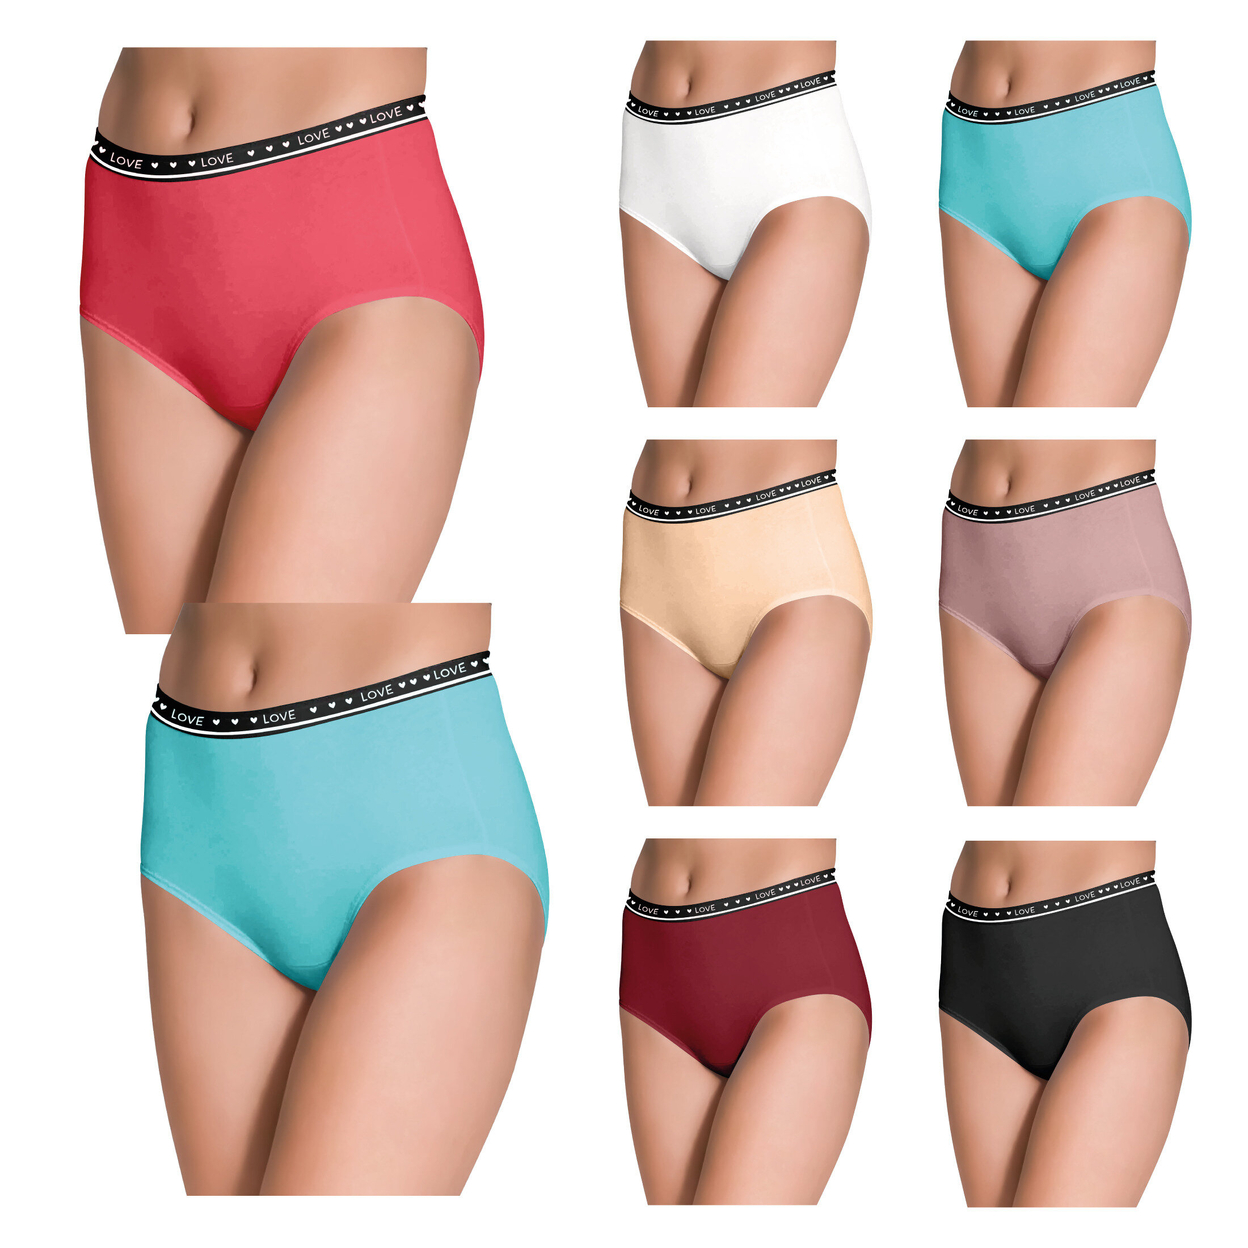 6-Pack: Women's Ultra Soft Moisture Wicking Panties Cotton Perfect Fit Underwear (Plus Sizes Available) - Large